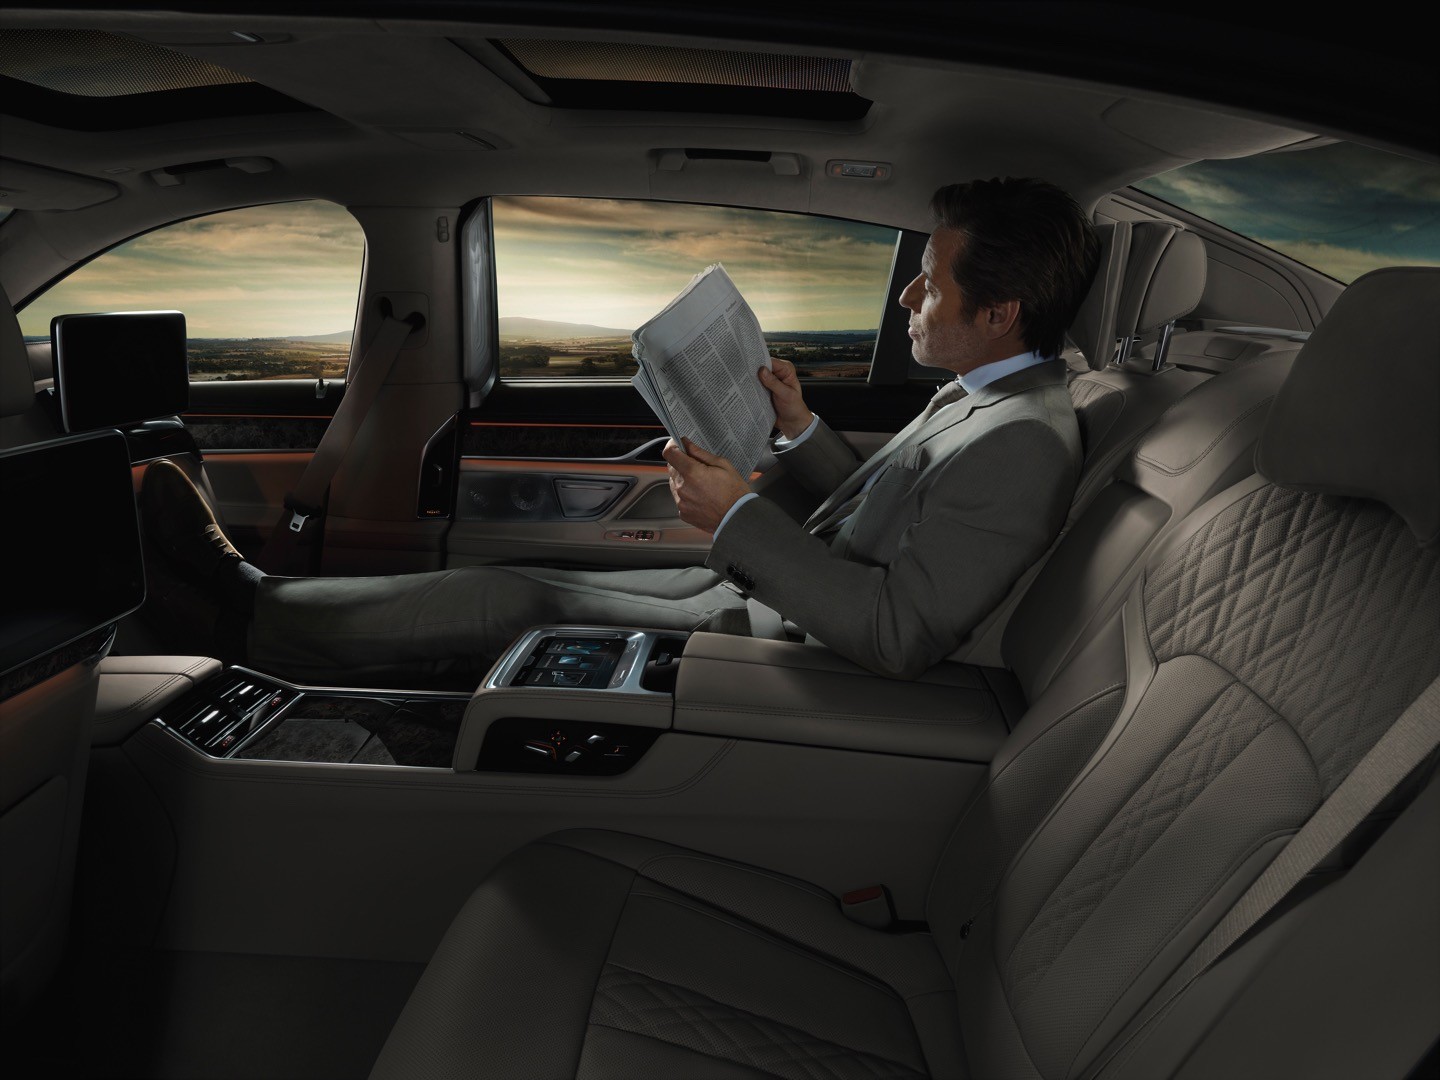 2016-bmw-7-series-finally-officially-unveiled-the-good-stuffs-inside-photo-gallery_89